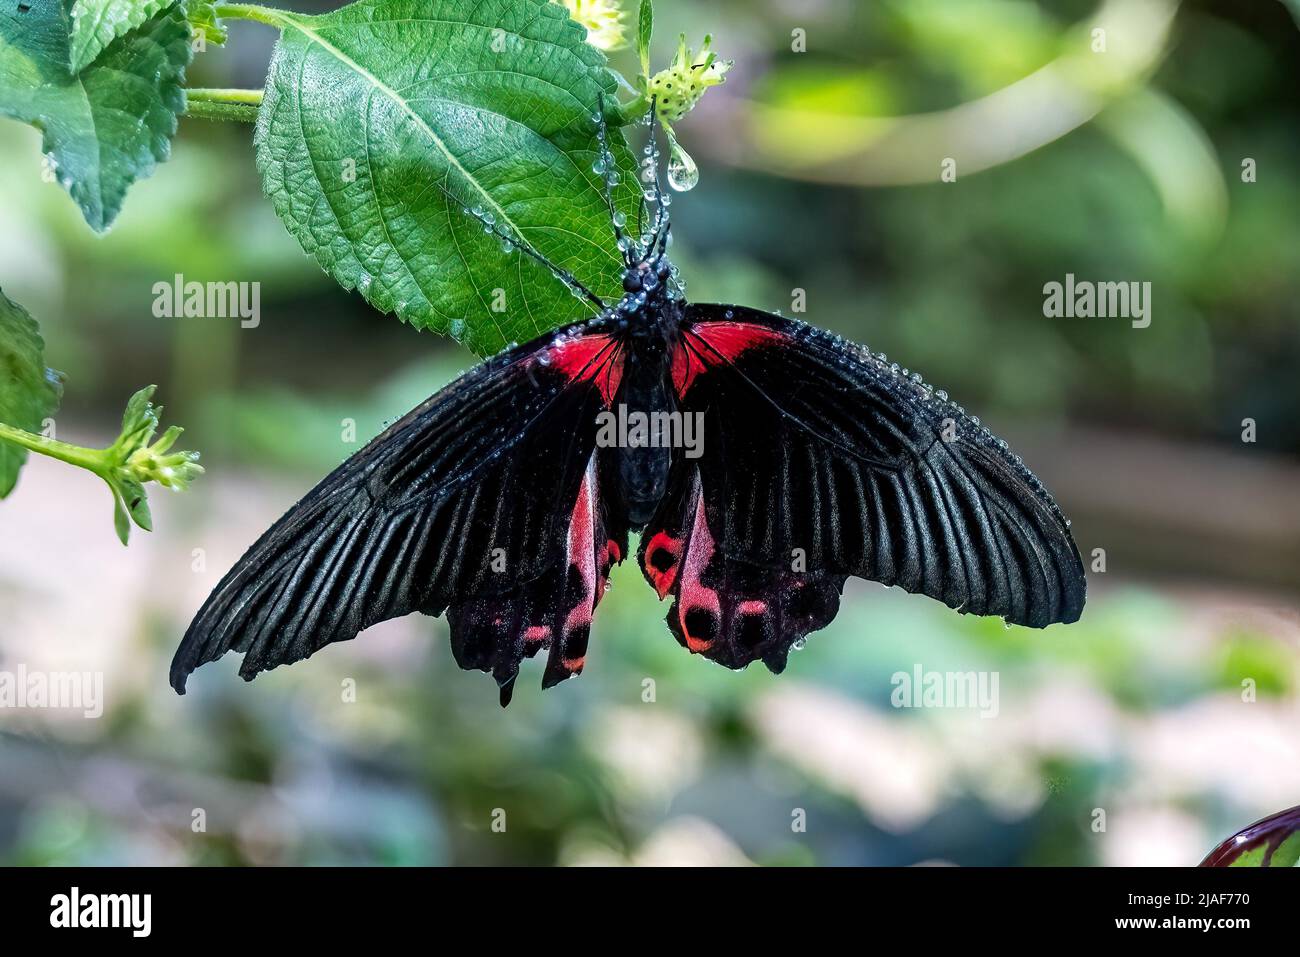 Scarlet Mormon Swallowtail Butterfly at Butterfly Garden, Middleton Common, Ditchling Common, East Sussex, Großbritannien. Stockfoto